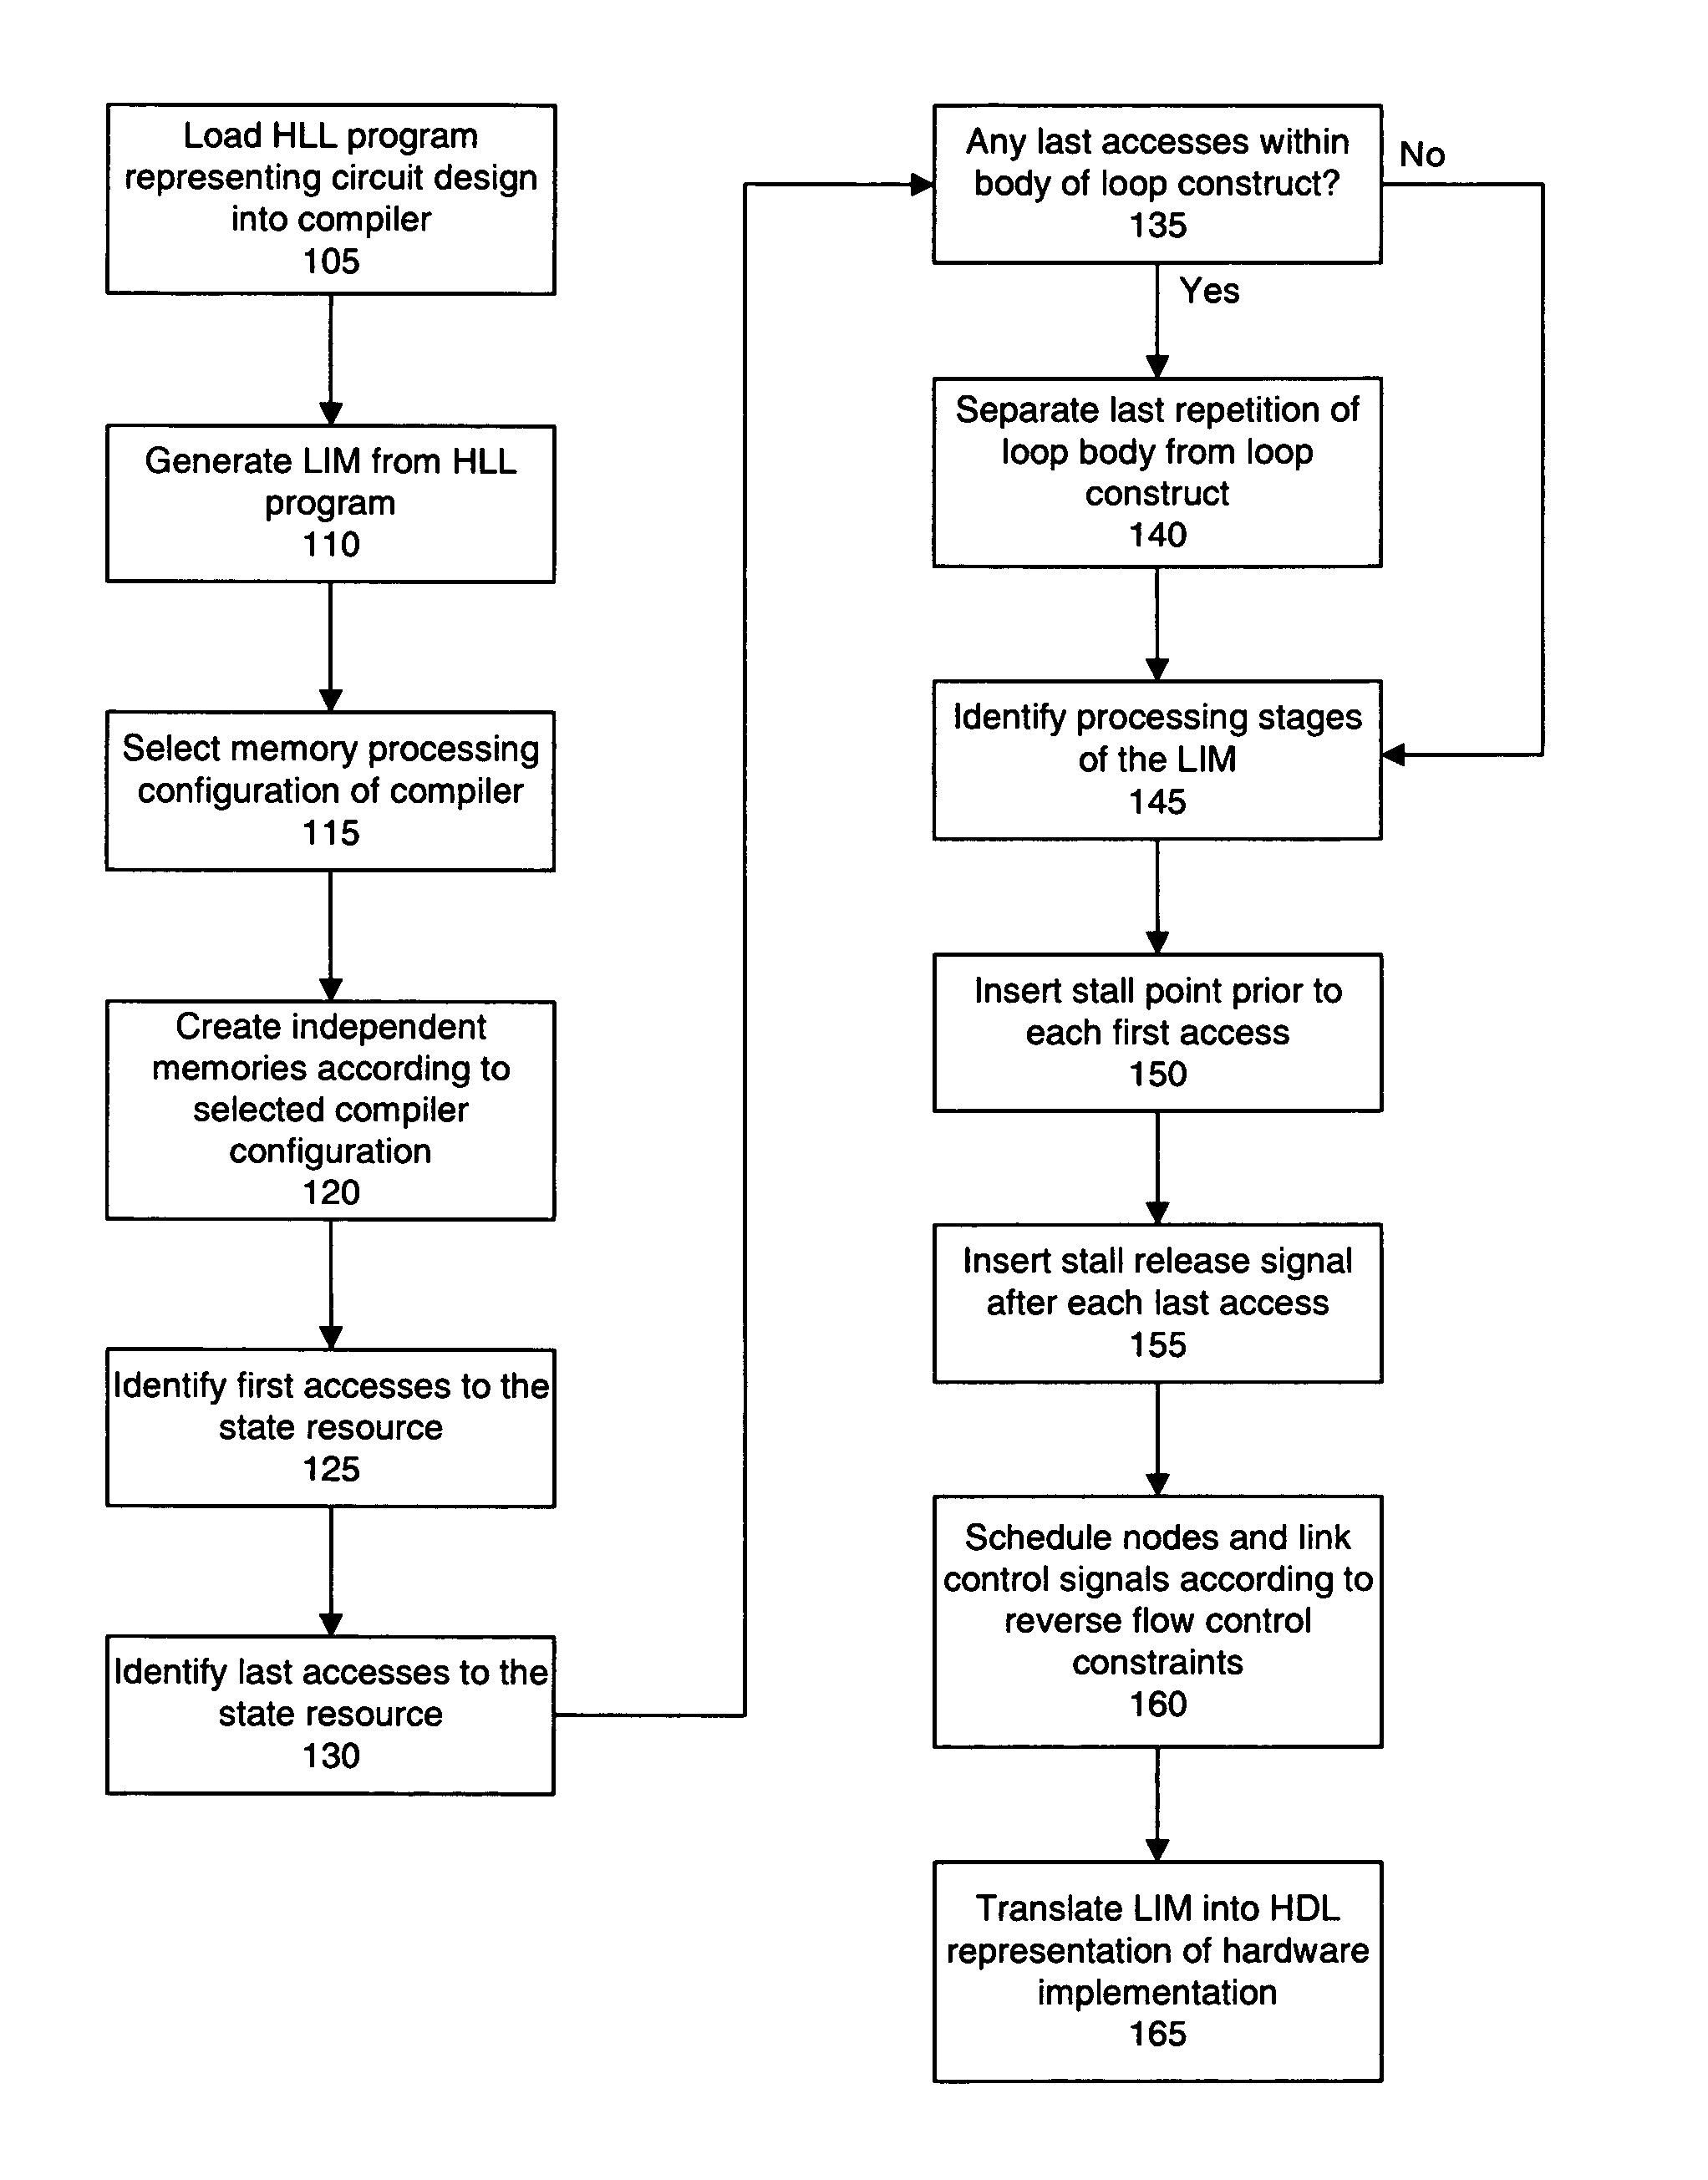 Auto generation of a multi-staged processing pipeline hardware implementation for designs captured in high level languages